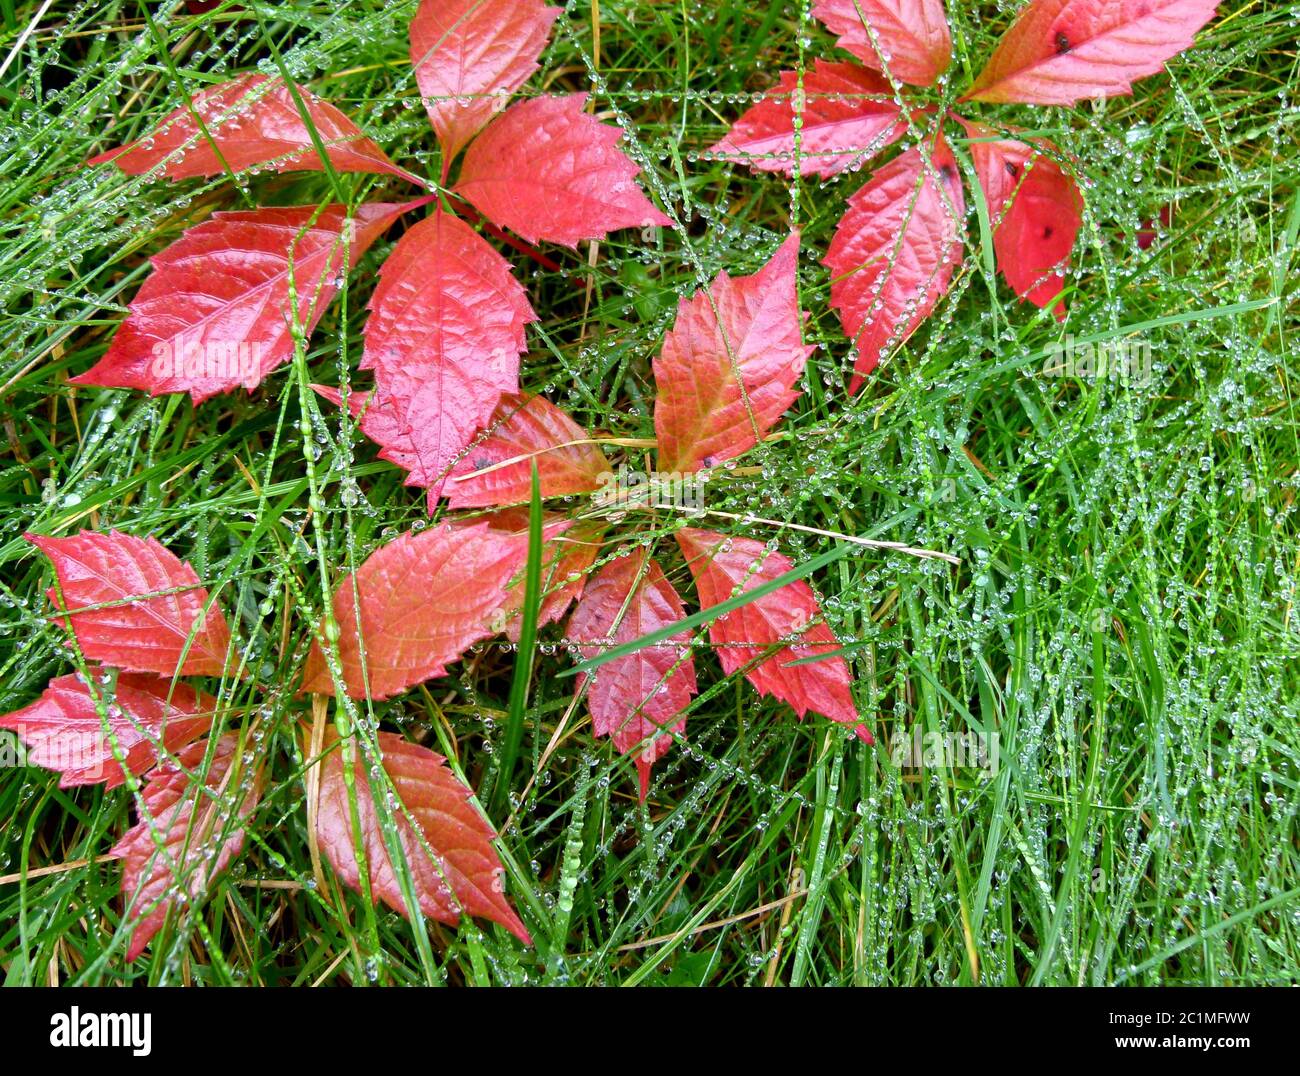 Bright red colored ivy leaves in green grass with raindrops Stock Photo